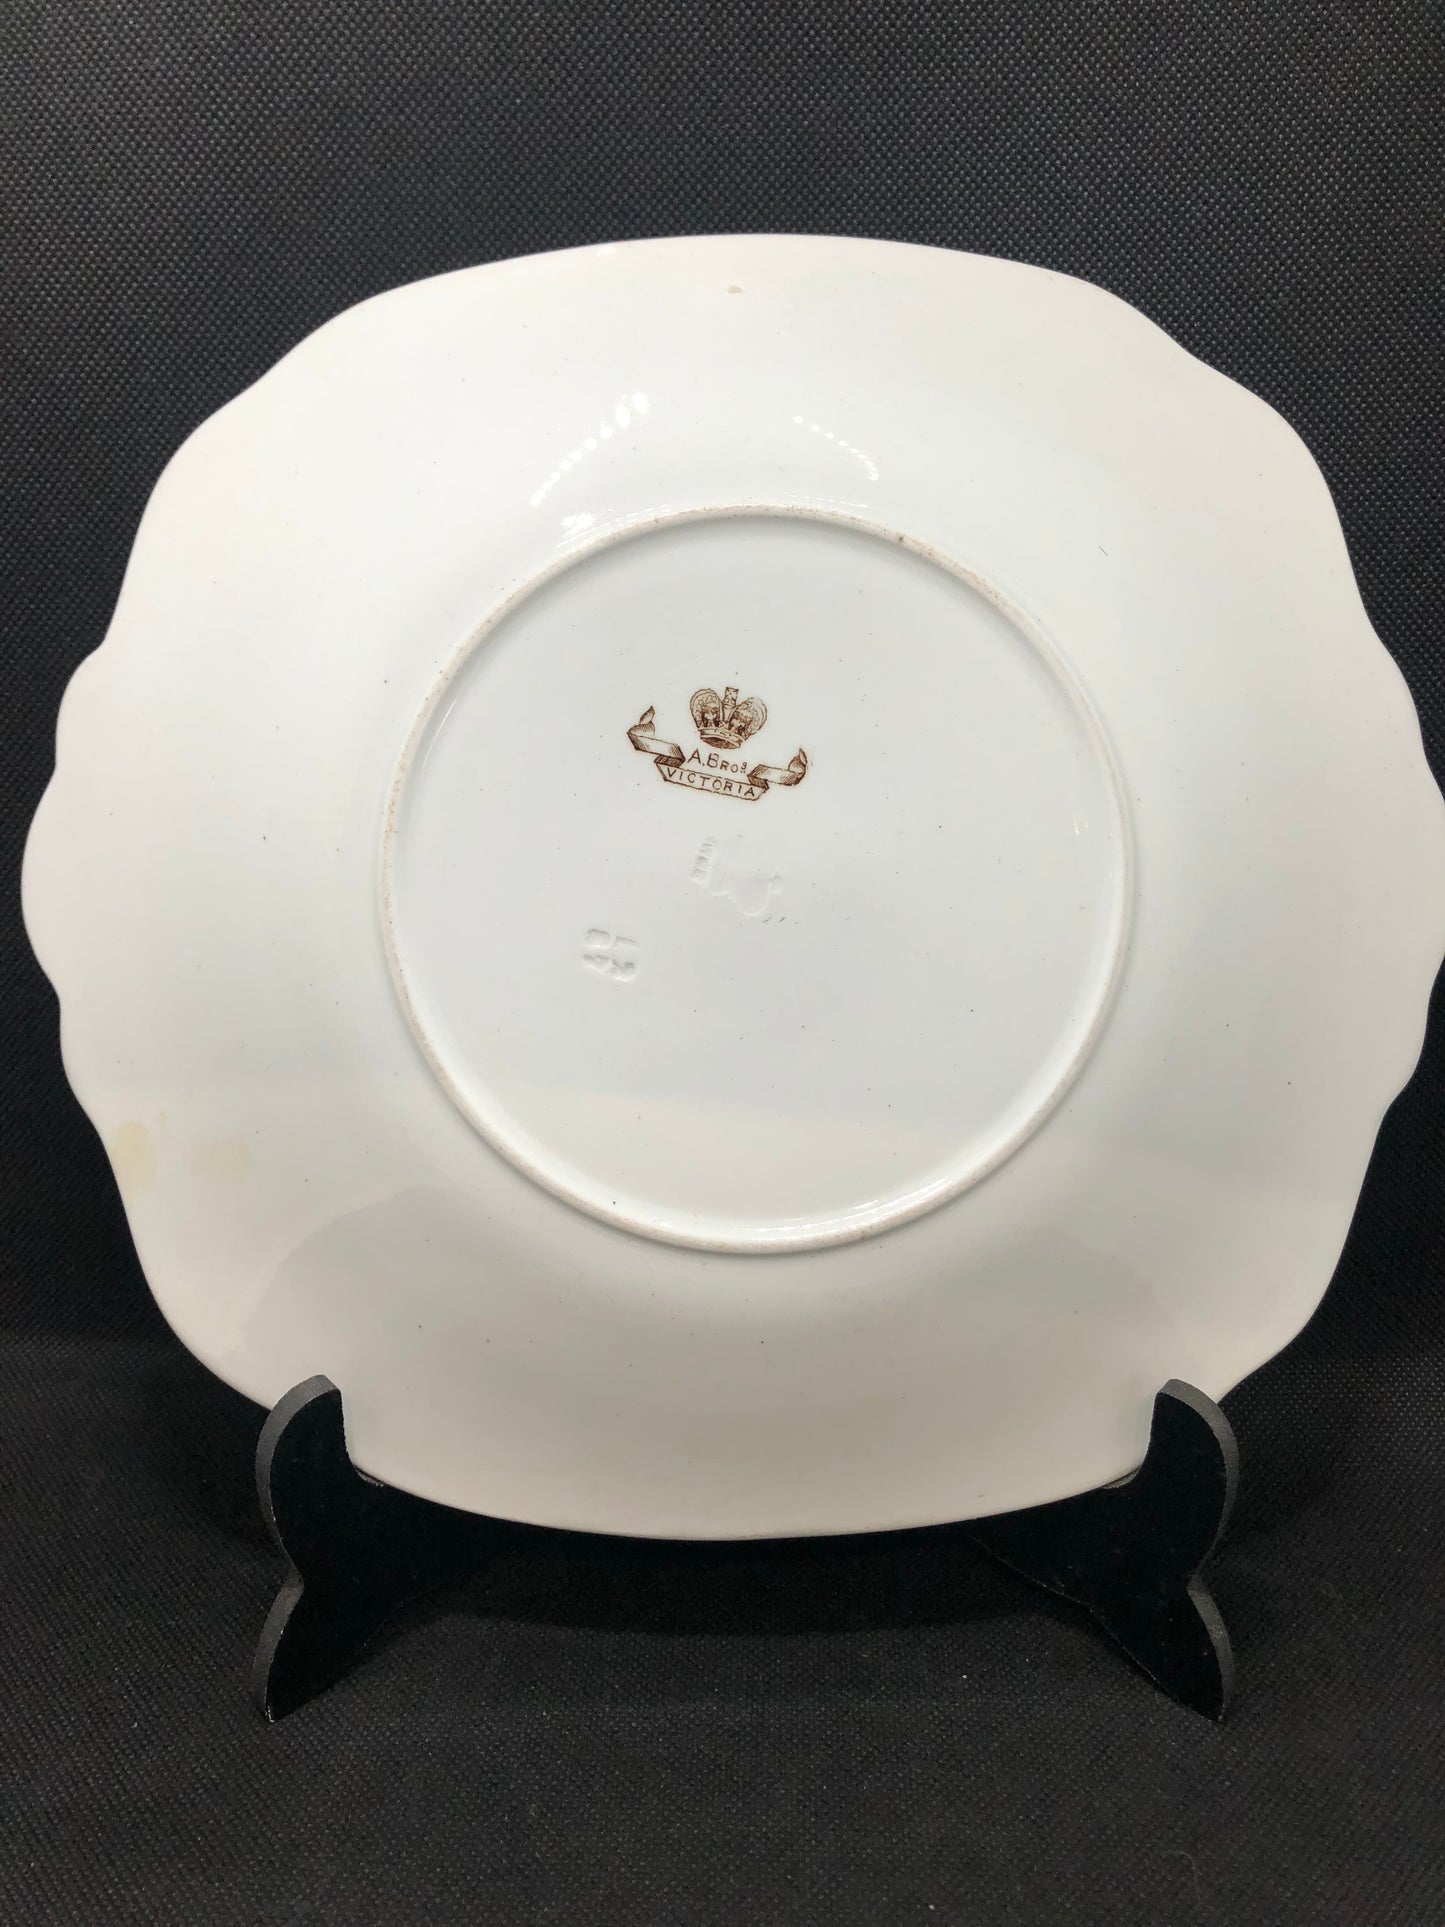 Porcelain plate antique Ashworth Bros Victoria Pattern Ironstone makers mark back view